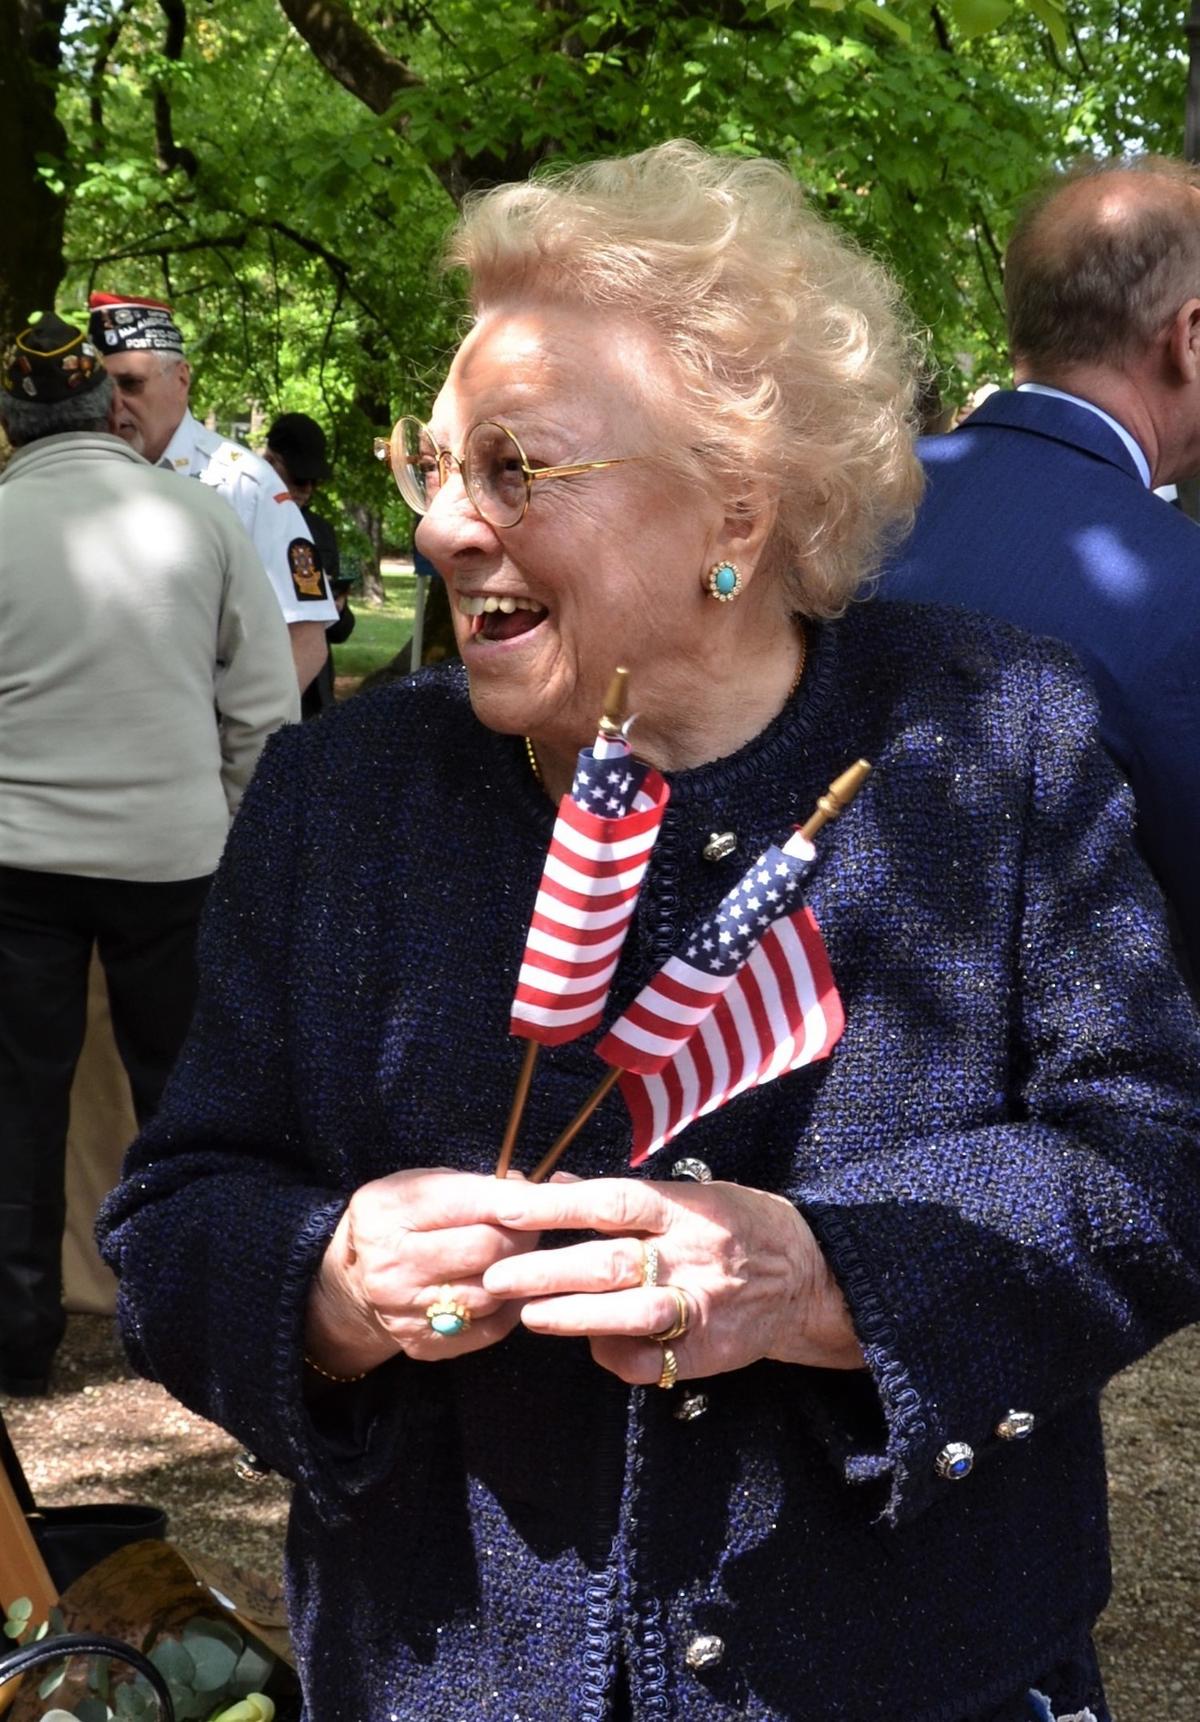 Mion smiles after the ceremony held at Giardini Salvi city park on April 28, 2022. (Courtesy of Laura Kreider/<a href="https://www.dvidshub.net/image/7165414/soldiers-us-army-garrison-italy-return-birthday-cake-after-77-years">U.S. Army Garrison Italy</a>)